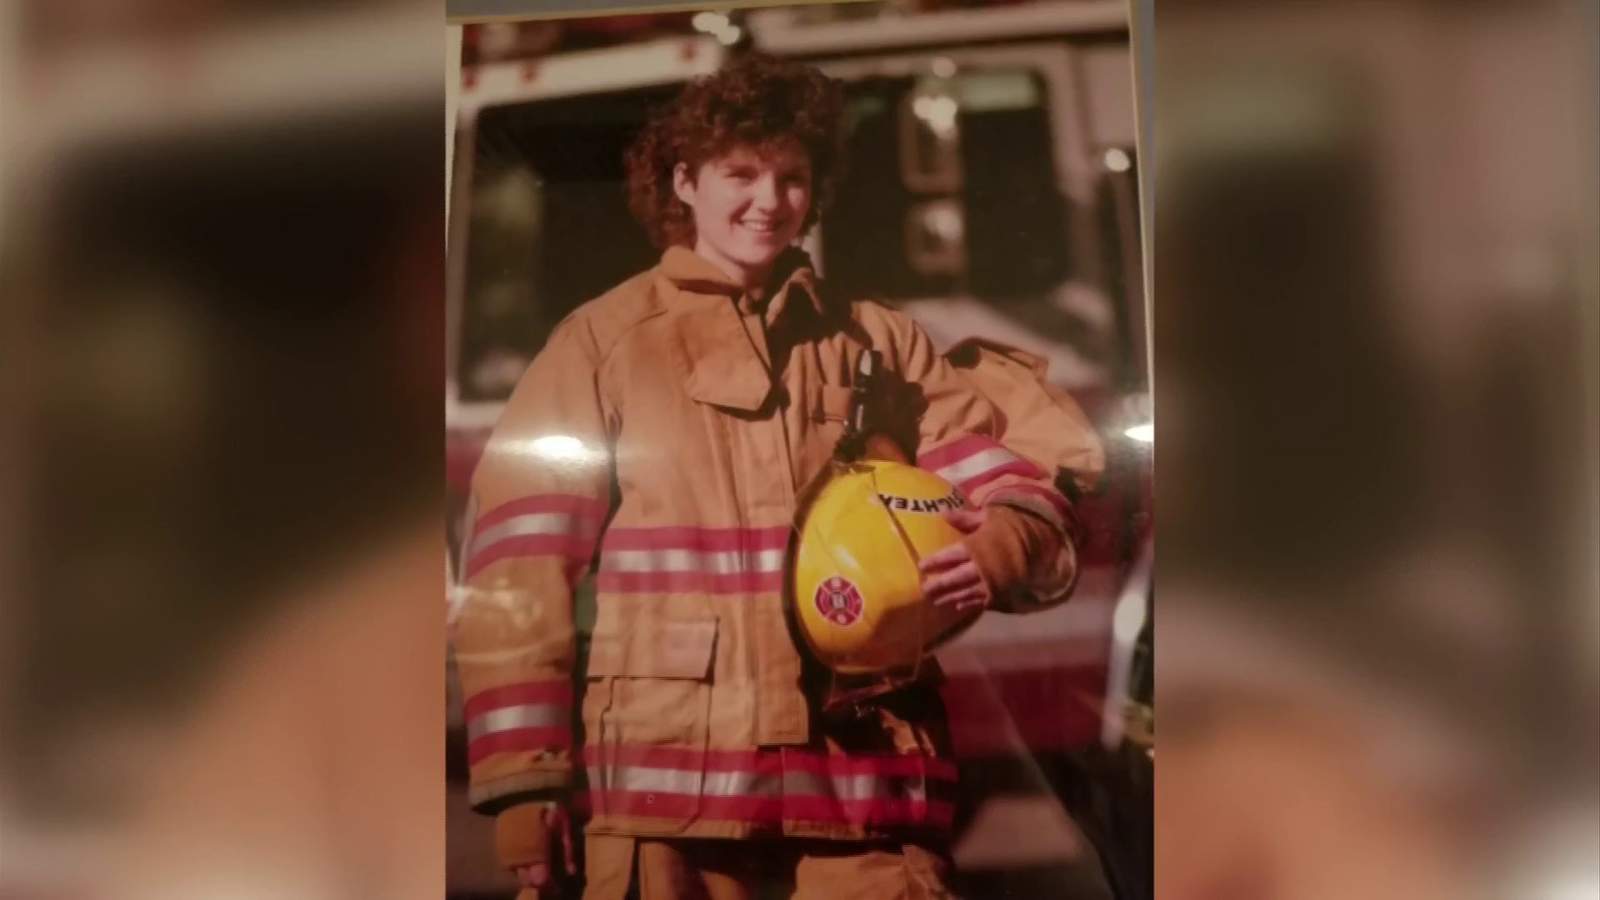 Blazing the trail: More women becoming firefighters in Roanoke